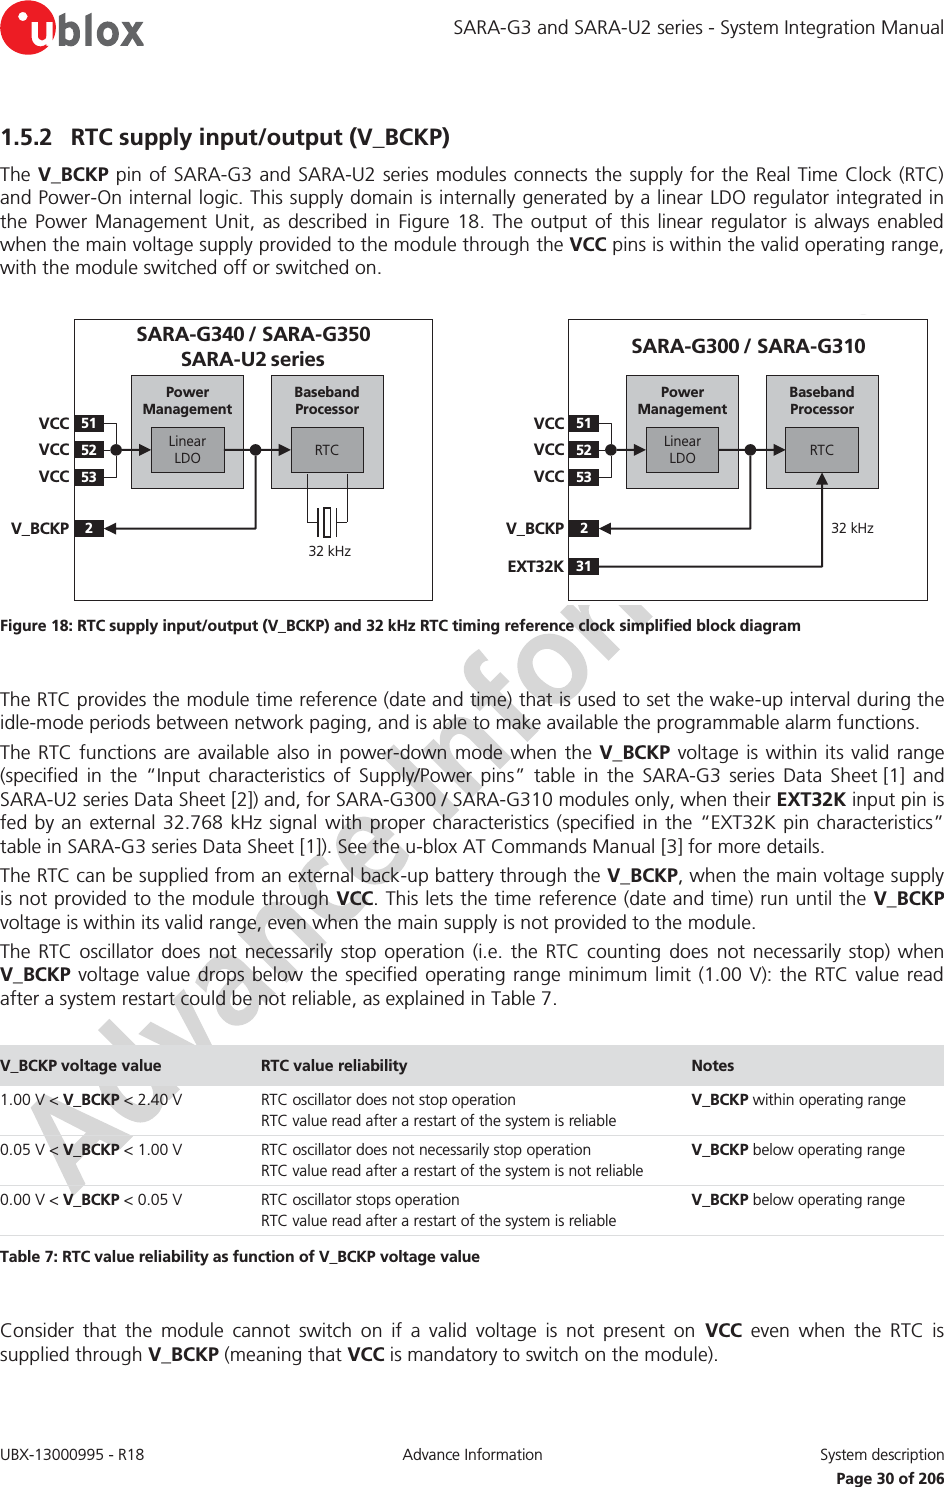 SARA-G3 and SARA-U2 series - System Integration Manual UBX-13000995 - R18  Advance Information  System description   Page 30 of 206 1.5.2 RTC supply input/output (V_BCKP) The V_BCKP pin of SARA-G3 and SARA-U2 series modules connects the supply for the Real Time Clock (RTC) and Power-On internal logic. This supply domain is internally generated by a linear LDO regulator integrated in the Power Management Unit, as described in Figure 18. The output of this linear regulator is always enabled when the main voltage supply provided to the module through the VCC pins is within the valid operating range, with the module switched off or switched on.  Baseband Processor51VCC52VCC53VCC2V_BCKPLinear LDORTCPower ManagementSARA-G340 / SARA-G350SARA-U2 series32 kHzBaseband Processor51VCC52VCC53VCC2V_BCKPLinear LDORTCPower ManagementSARA-G300 / SARA-G31032 kHz31EXT32K Figure 18: RTC supply input/output (V_BCKP) and 32 kHz RTC timing reference clock simplified block diagram  The RTC provides the module time reference (date and time) that is used to set the wake-up interval during the idle-mode periods between network paging, and is able to make available the programmable alarm functions. The RTC functions are available also in power-down mode when the V_BCKP voltage is within its valid range (specified in the “Input characteristics of Supply/Power pins” table in the SARA-G3 series Data Sheet [1]  and SARA-U2 series Data Sheet [2]) and, for SARA-G300 / SARA-G310 modules only, when their EXT32K input pin is fed by an external 32.768 kHz signal with proper characteristics (specified in the “EXT32K pin characteristics” table in SARA-G3 series Data Sheet [1]). See the u-blox AT Commands Manual [3] for more details. The RTC can be supplied from an external back-up battery through the V_BCKP, when the main voltage supply is not provided to the module through VCC. This lets the time reference (date and time) run until the V_BCKP voltage is within its valid range, even when the main supply is not provided to the module. The RTC oscillator does not necessarily stop operation (i.e. the RTC counting does not necessarily stop) when V_BCKP voltage value drops below the specified operating range minimum limit (1.00 V): the RTC value read after a system restart could be not reliable, as explained in Table 7.  V_BCKP voltage value  RTC value reliability  Notes 1.00 V &lt; V_BCKP &lt; 2.40 V RTC oscillator does not stop operation RTC value read after a restart of the system is reliable V_BCKP within operating range 0.05 V &lt; V_BCKP &lt; 1.00 V RTC oscillator does not necessarily stop operation RTC value read after a restart of the system is not reliable V_BCKP below operating range 0.00 V &lt; V_BCKP &lt; 0.05 V RTC oscillator stops operation RTC value read after a restart of the system is reliable V_BCKP below operating range Table 7: RTC value reliability as function of V_BCKP voltage value   Consider that the module cannot switch on if a valid voltage is not present on VCC even when the RTC is supplied through V_BCKP (meaning that VCC is mandatory to switch on the module). 